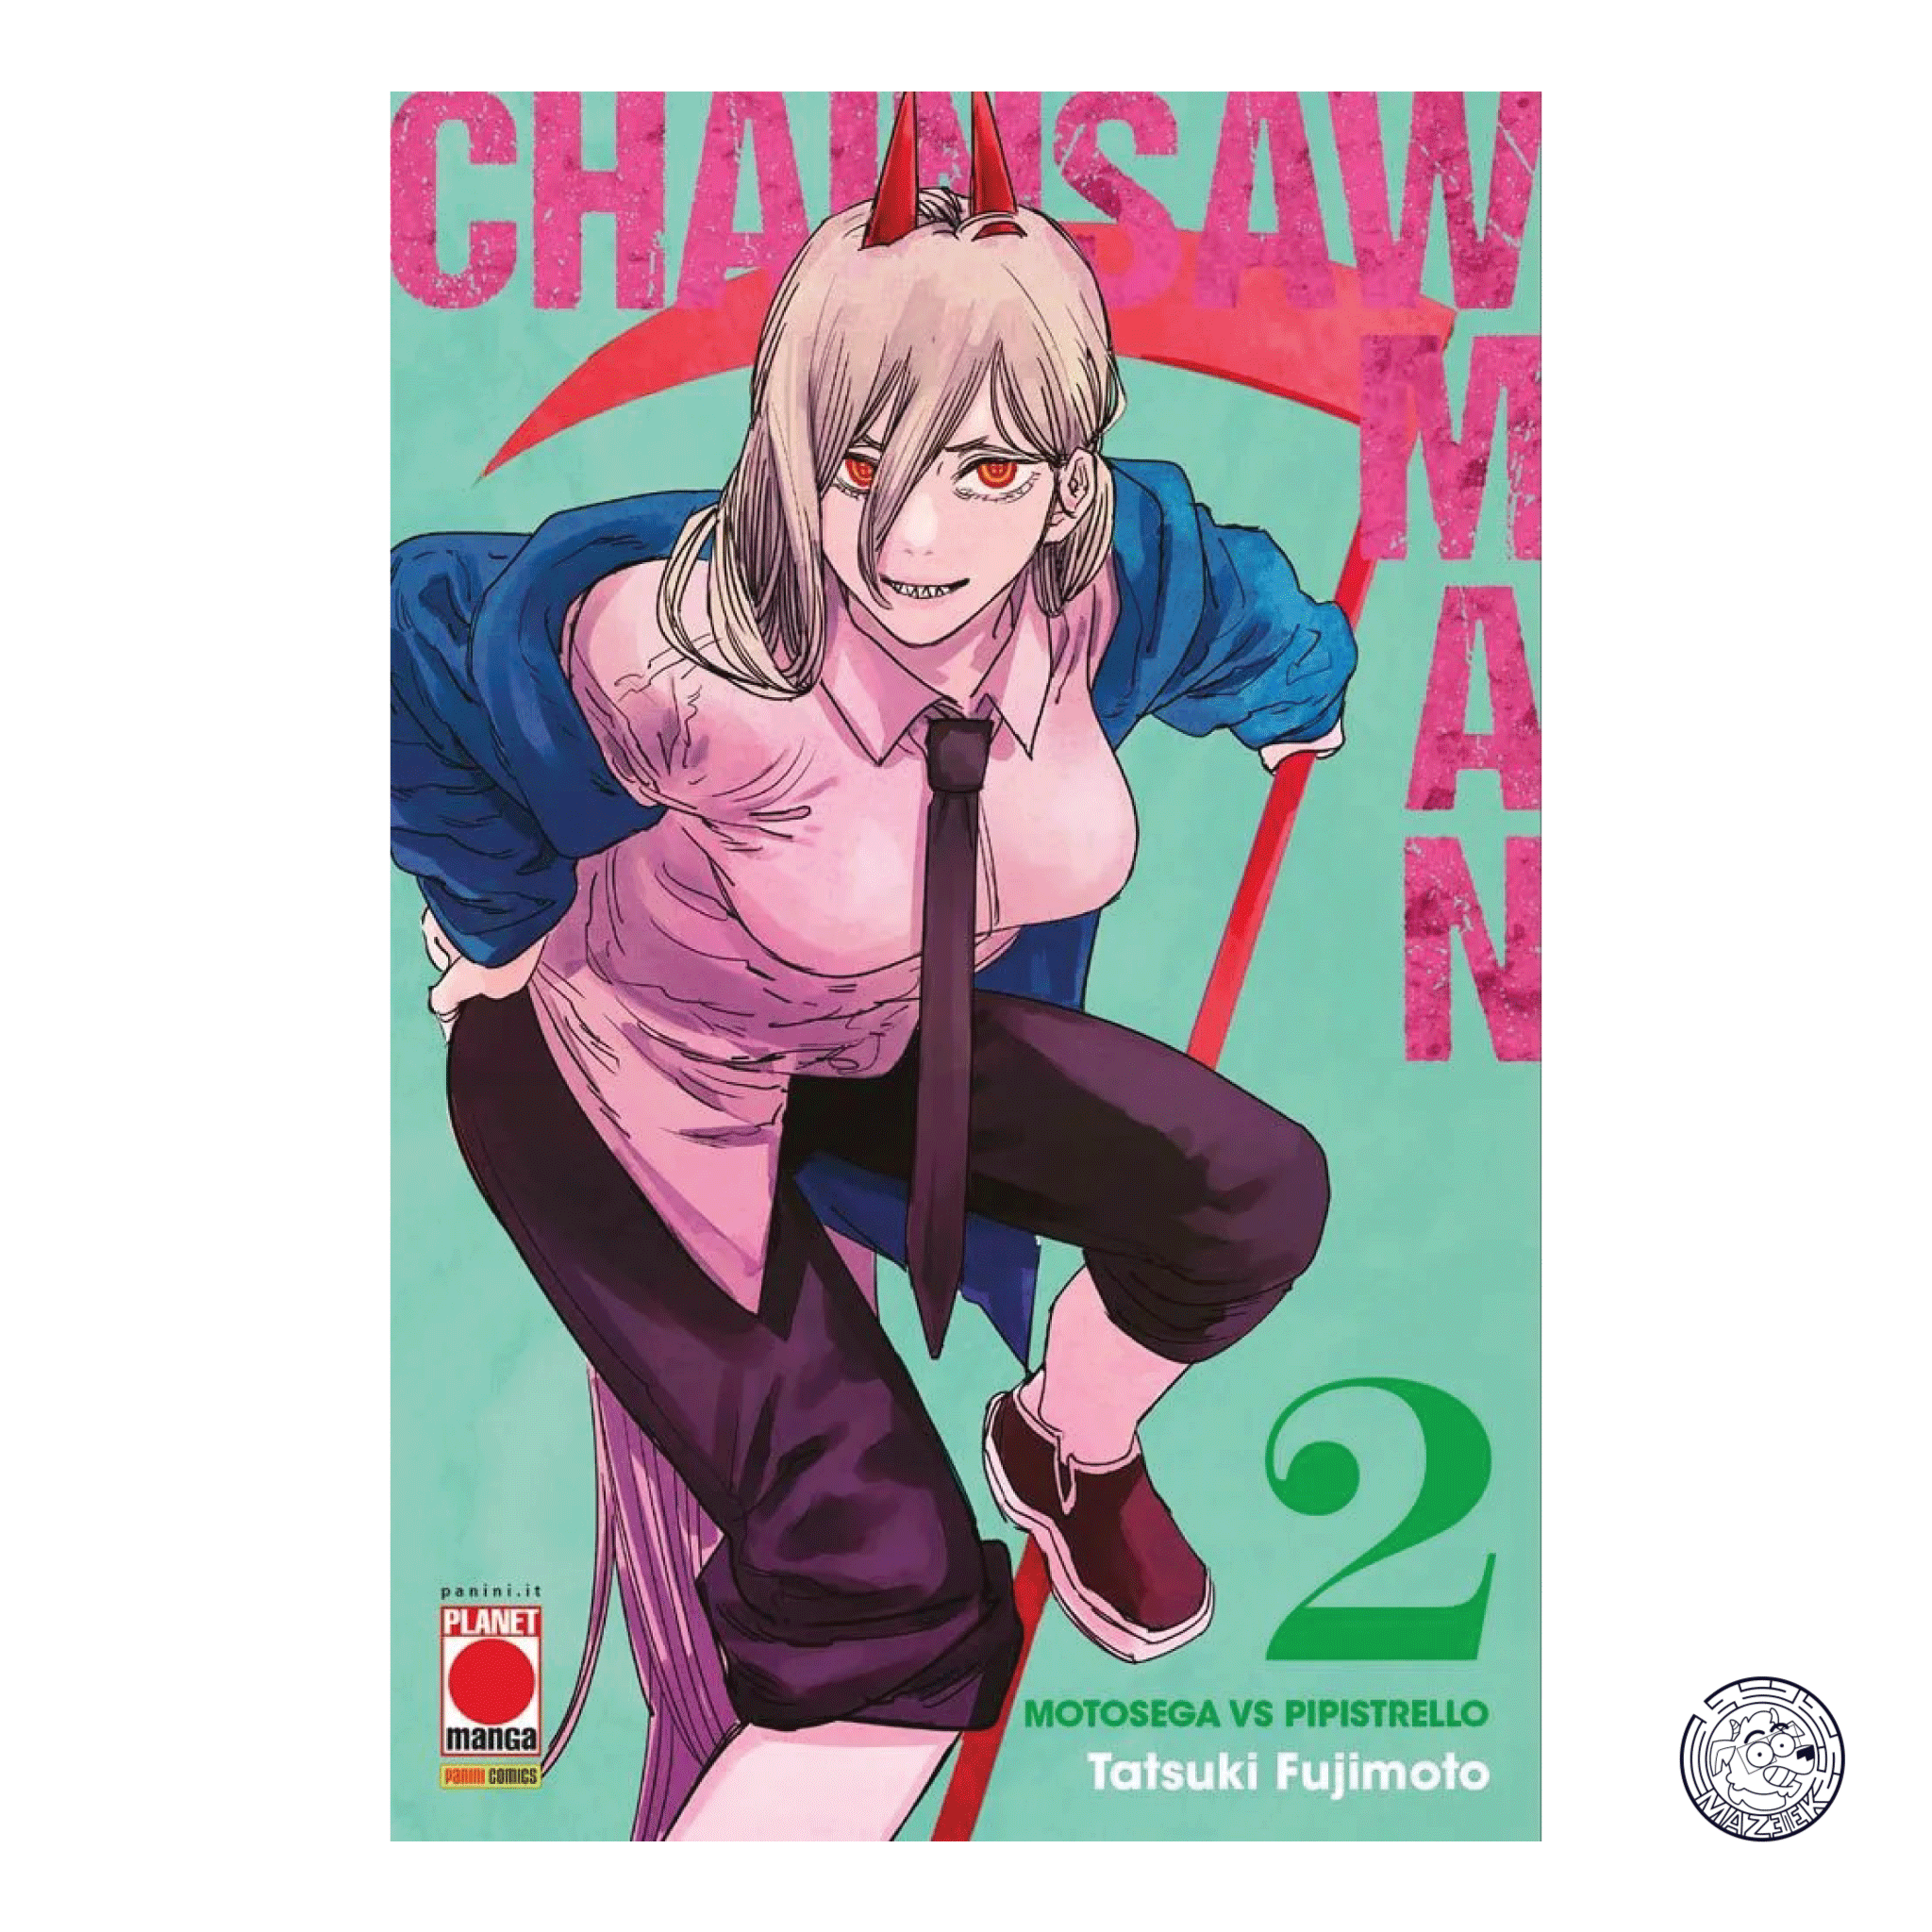 Chainsaw Man 02 - Second Printing